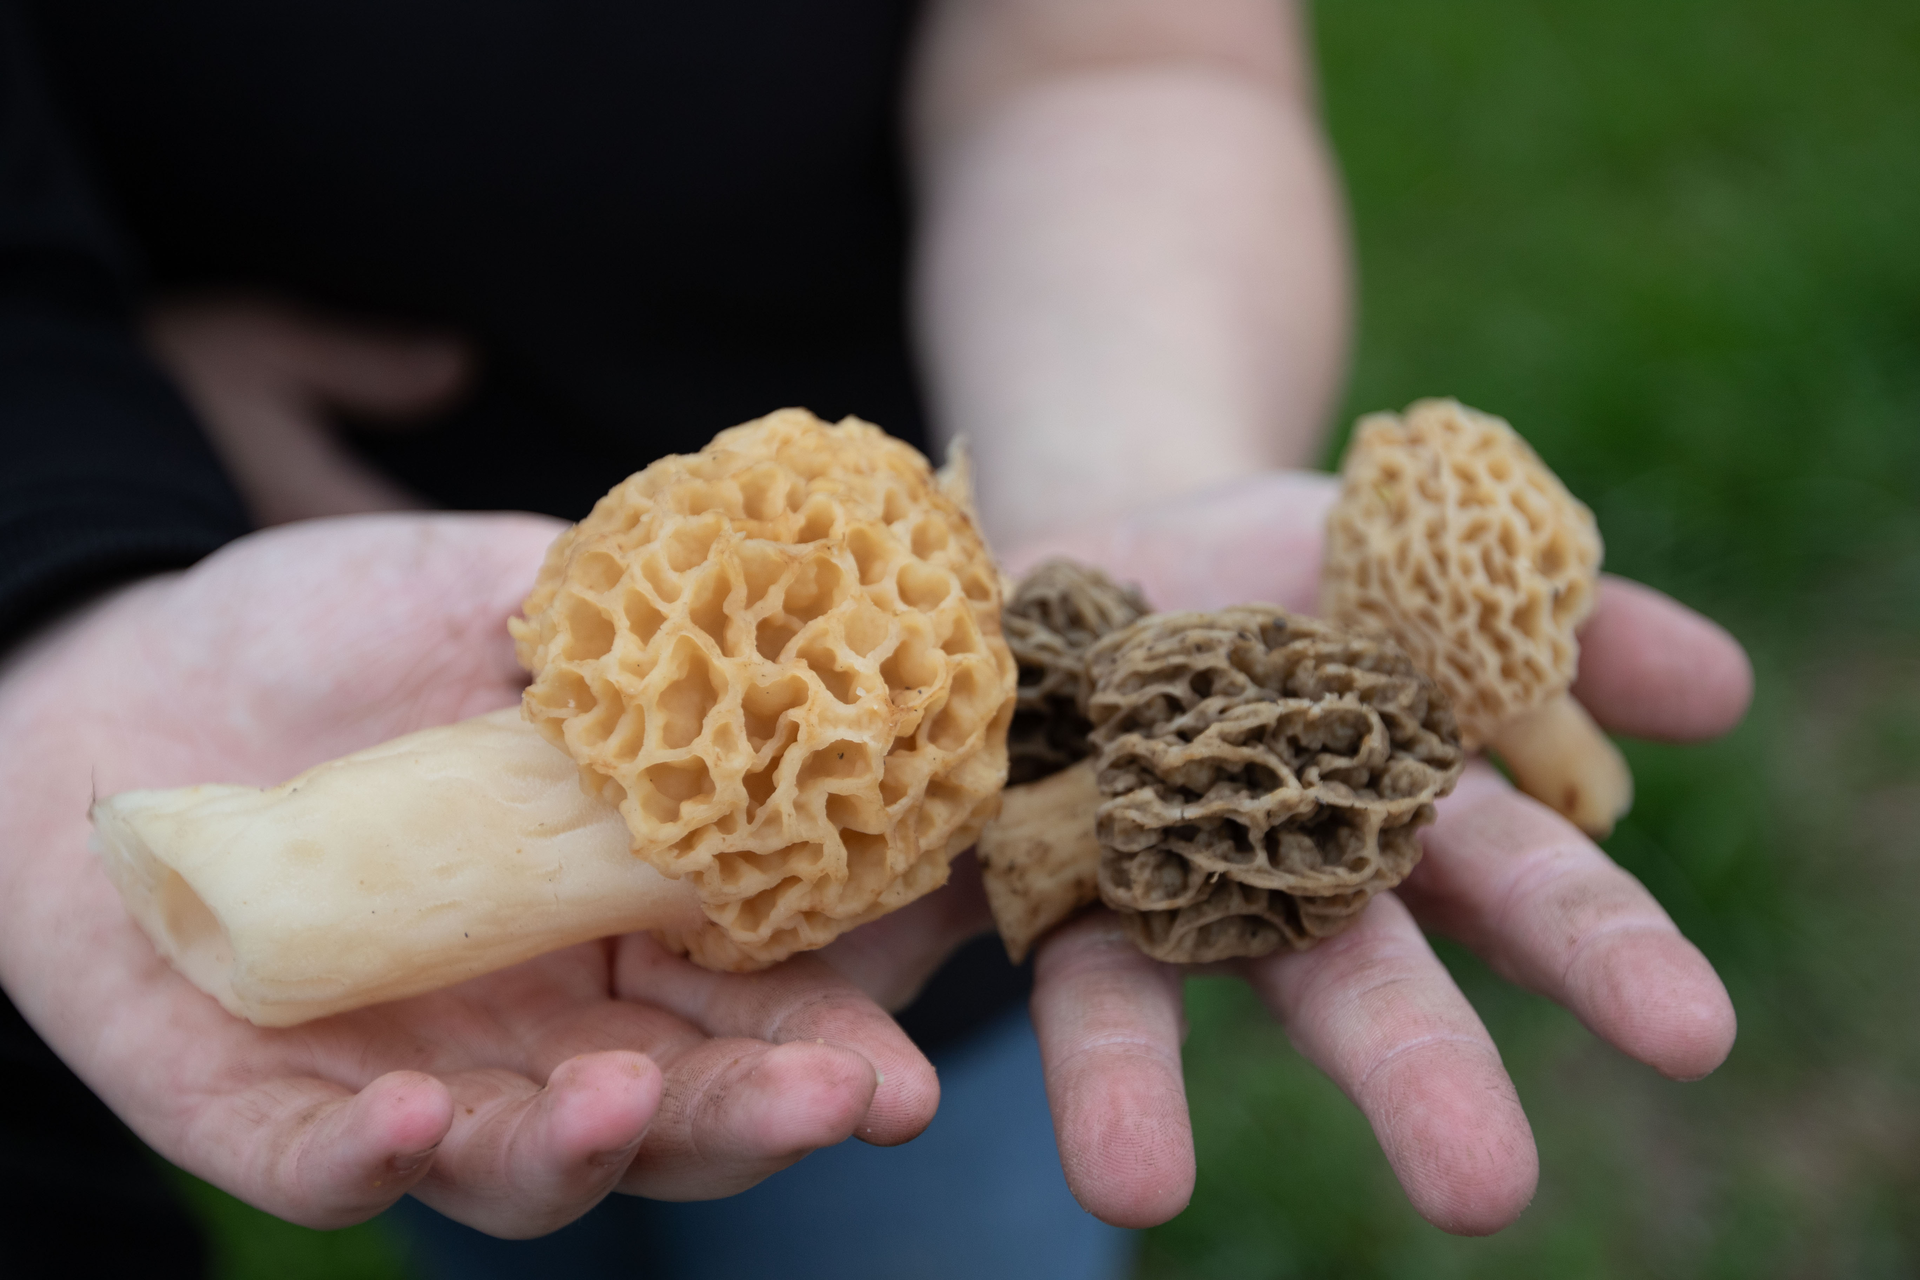 Morel mushroom season underway in Ohio. Where are the best spots to find them? Use this map